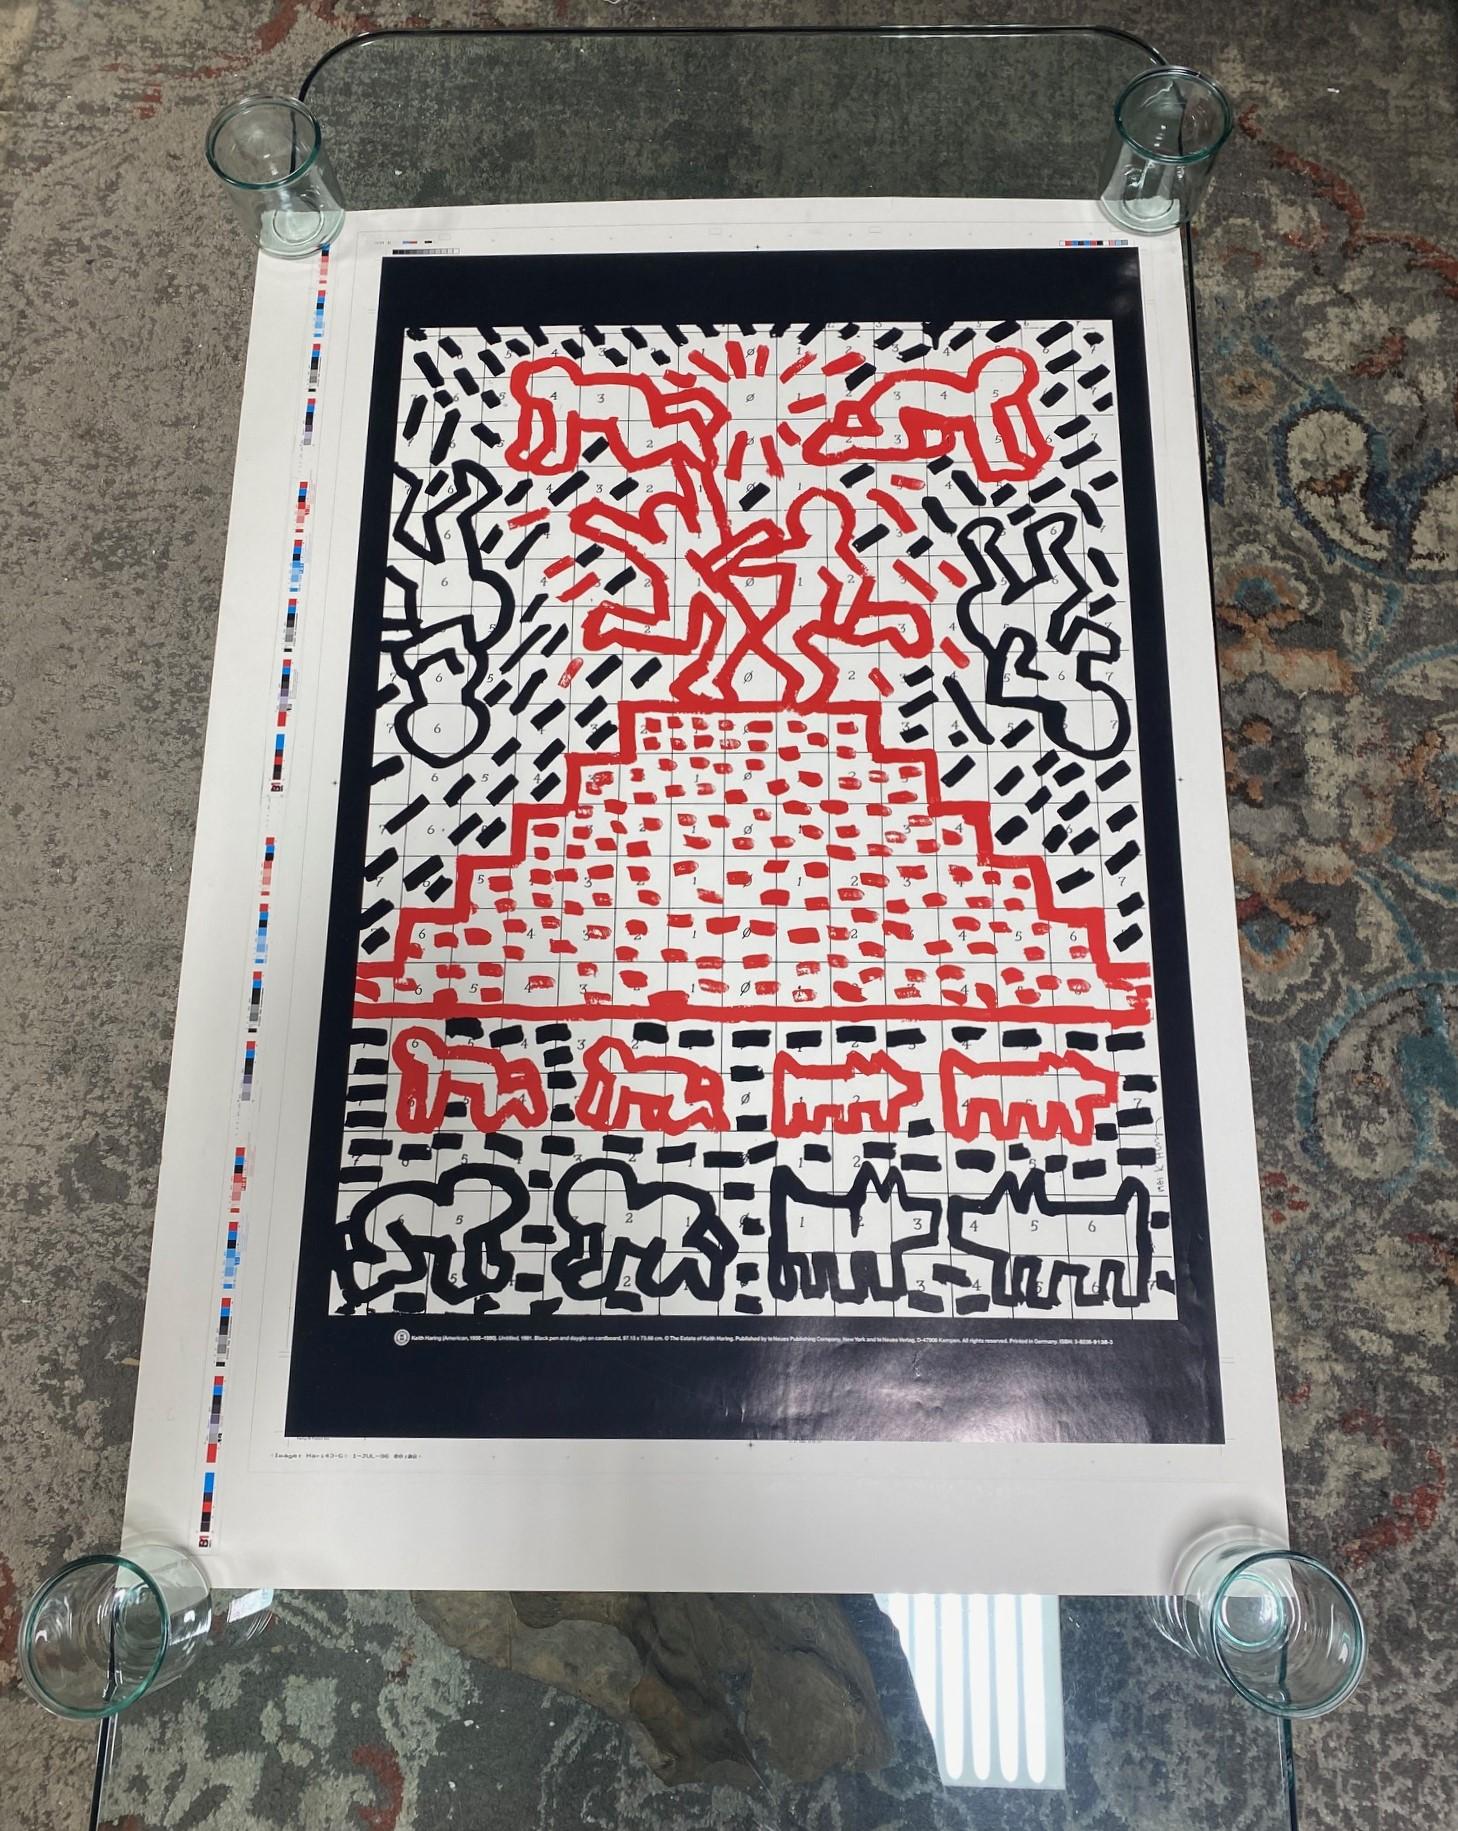 A rare and extremely hard-to-find vintage Keith Haring (1958-1990) Pop Shop Art offset lithograph poster (Untitled but often referred to as his 